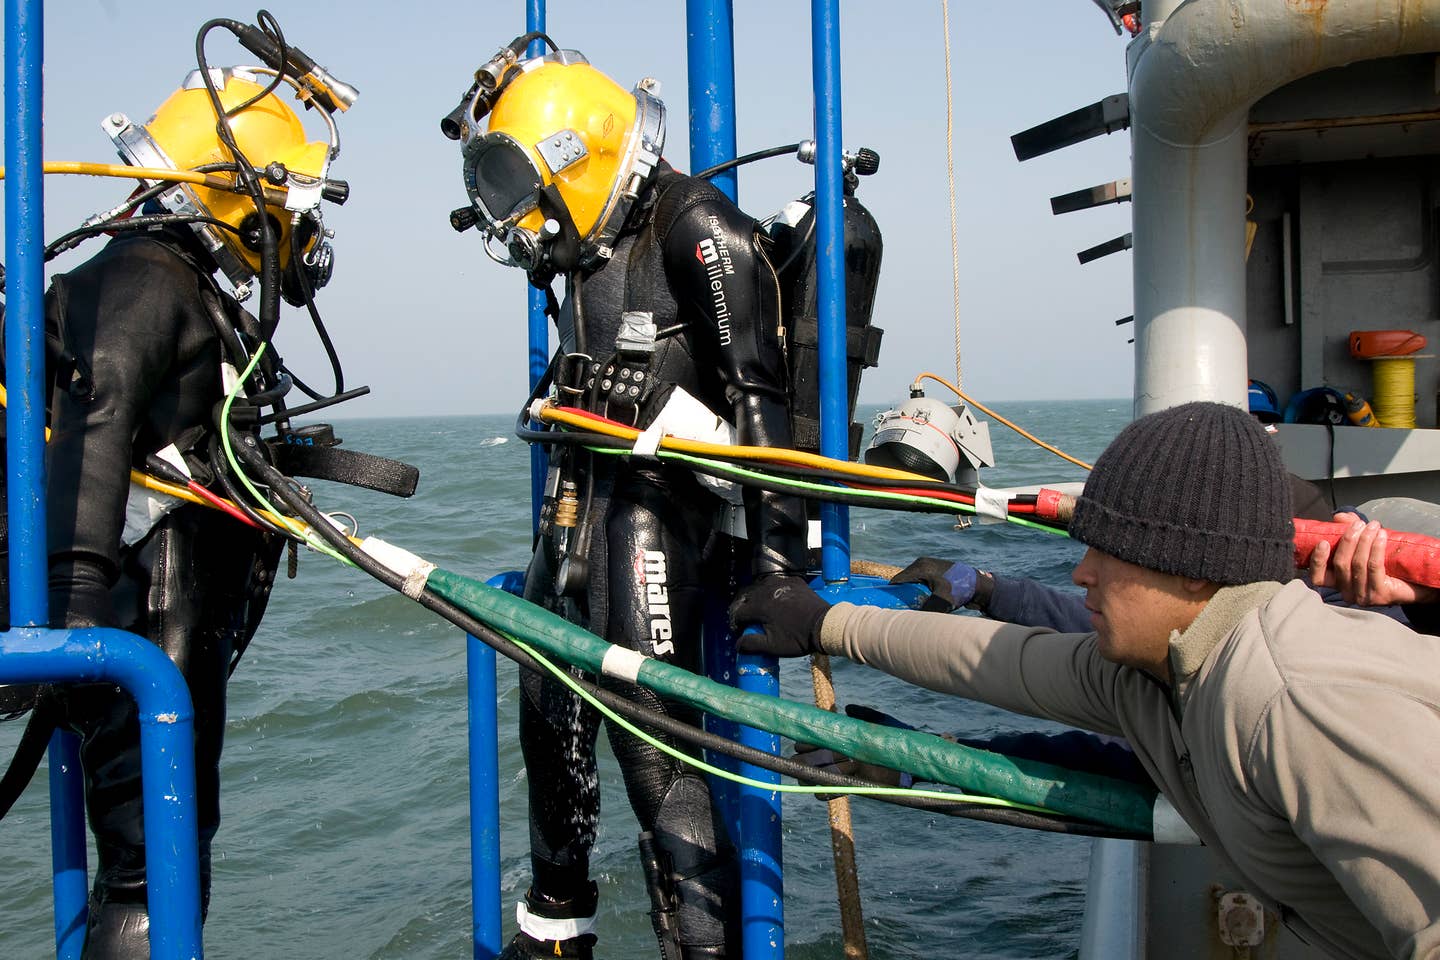 Dive tenders recover a diver assigned to the Republic of Korea Sea Salvage and Rescue Unit, and a member of the U.S. Navy Mobile Diving and Salvage Unit (MDSU) 1, aboard the Military Sealift Command rescue and salvage ship USNS <em>Salvor</em> (T-ARS 52) during a joint dive training exercise in the Yellow Sea. <em>U.S. Navy photo by Mass Communication Specialist 2nd Class Byron C. Linder/Released</em>